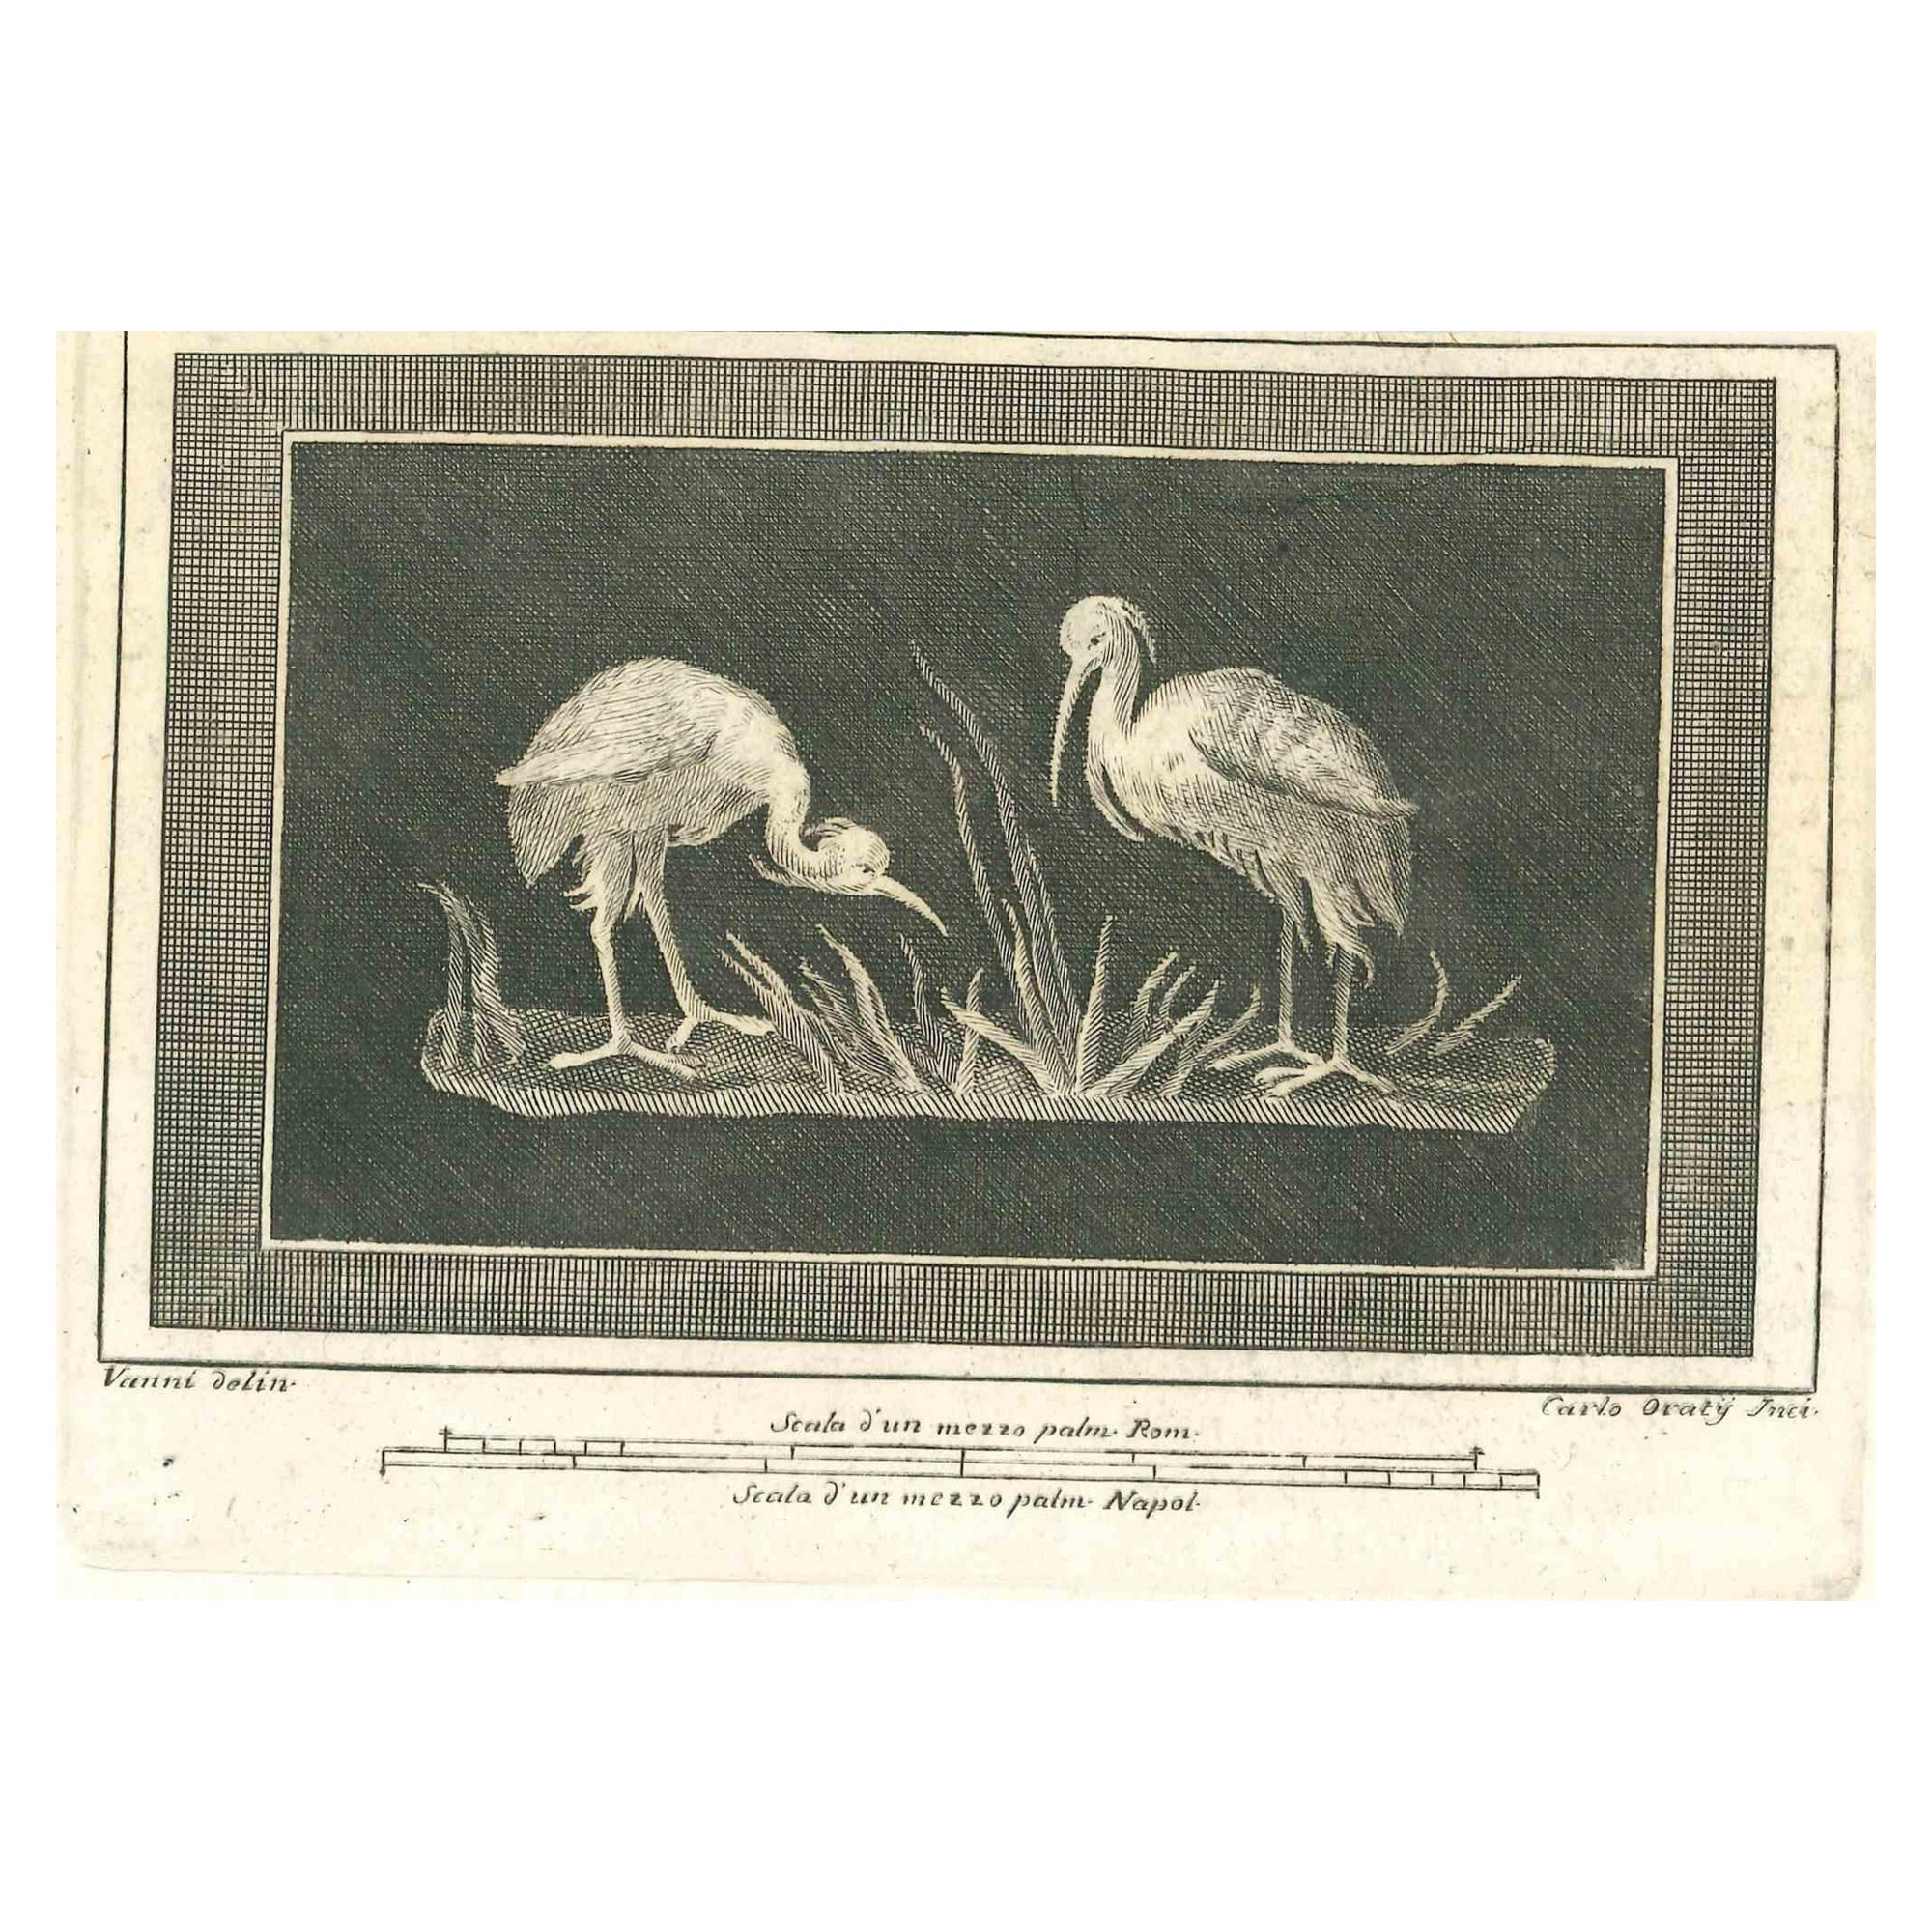 Ancient Roman Fresco from the series "Antiquities of Herculaneum", is an etching on paper realized by Carlo Oraty in the 18th Century.

Signed on the plate.

Good conditions with some foxing.

The etching belongs to the print suite “Antiquities of